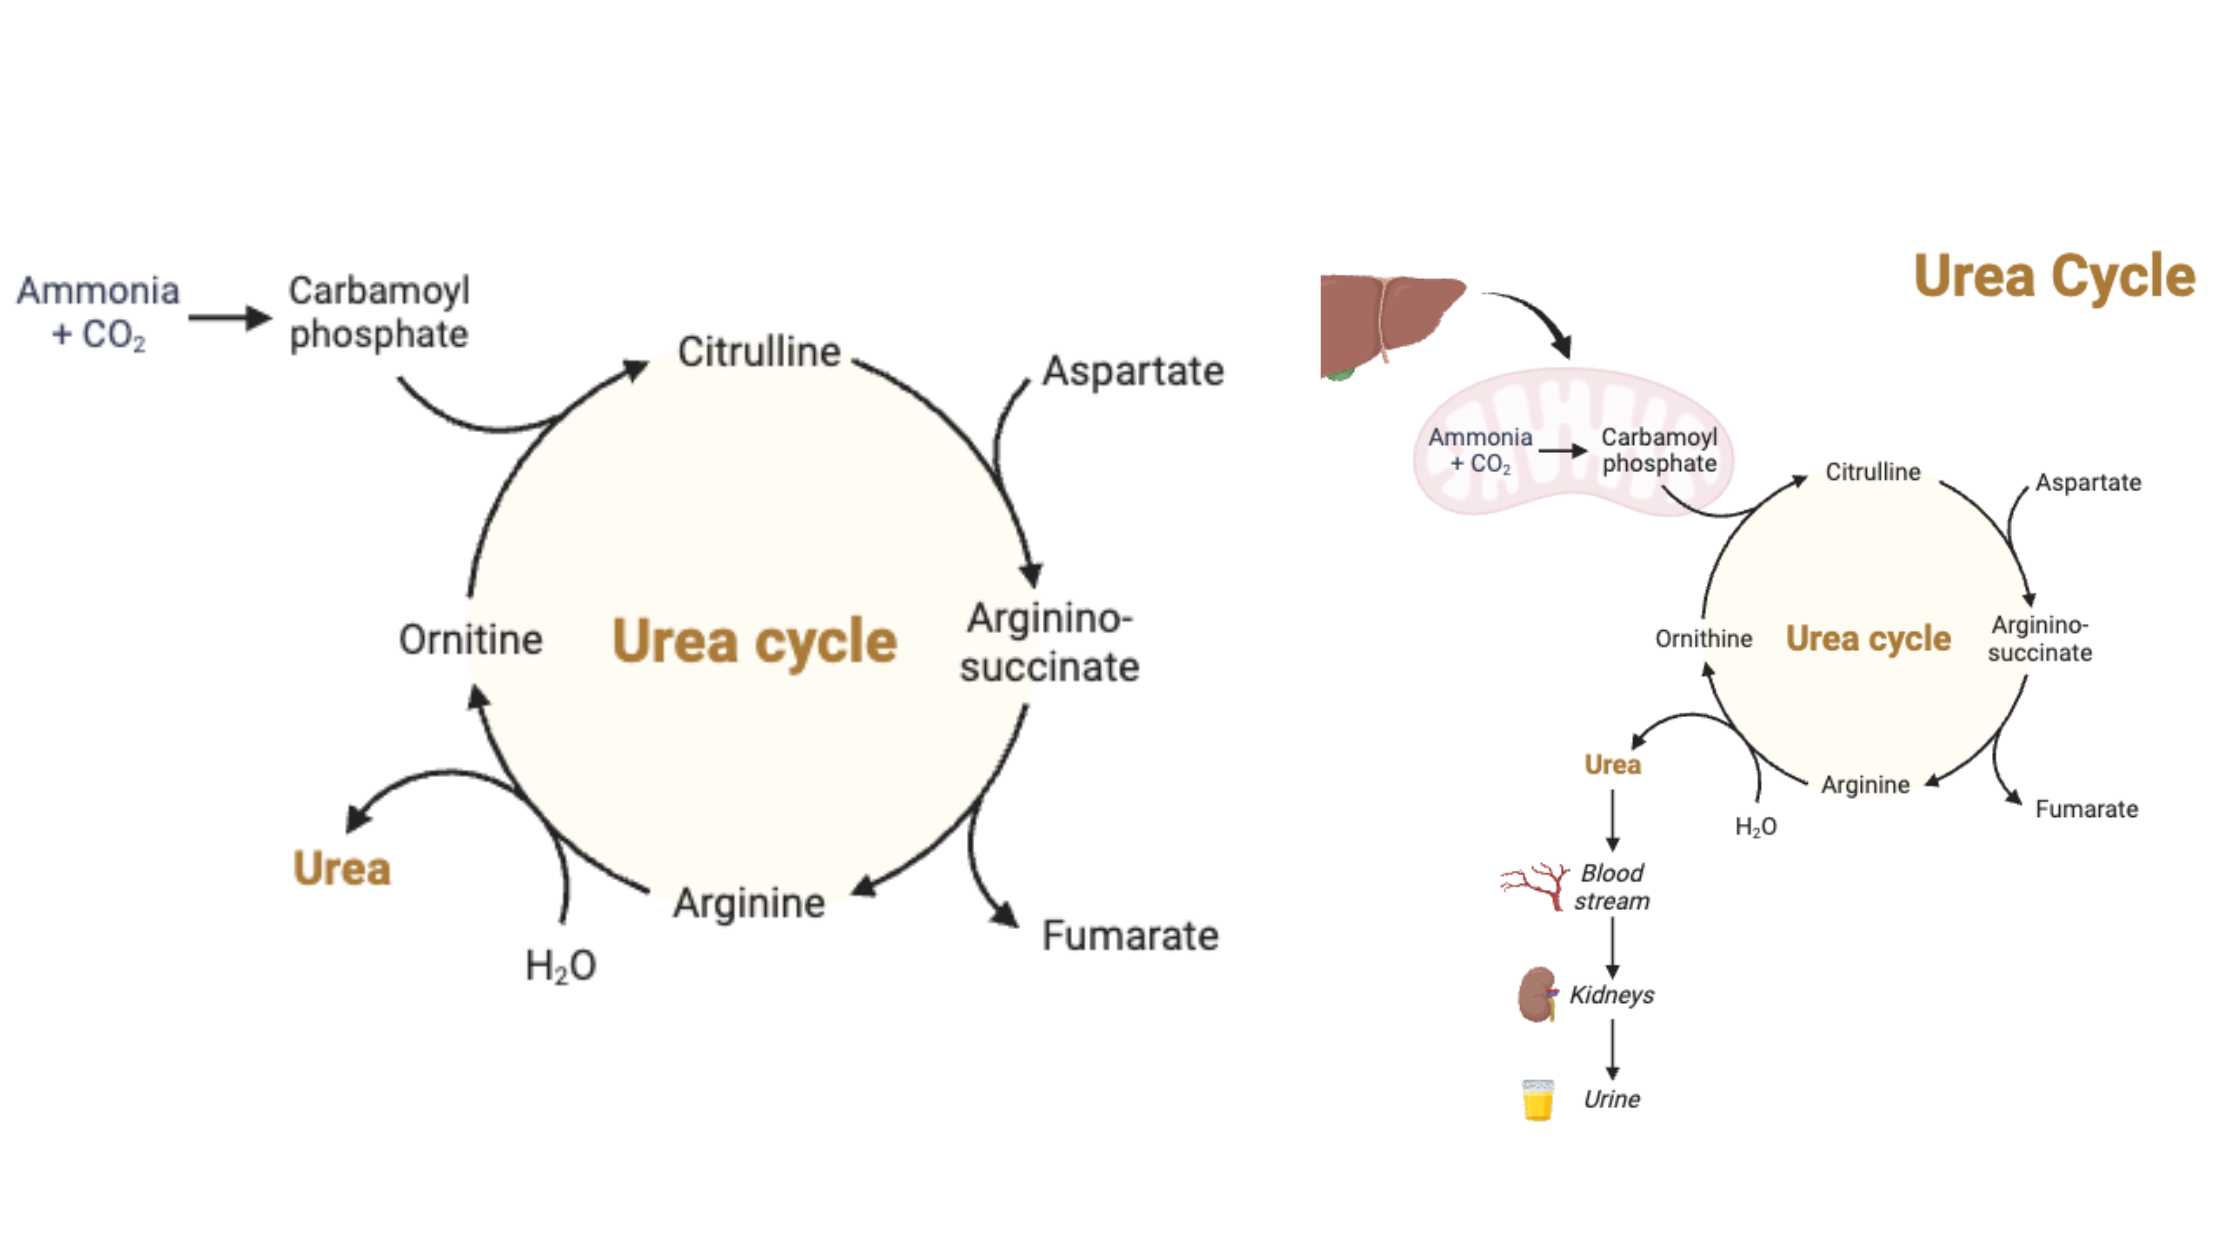 Urea Cycle - Steps, Reactions, Products, Regulation, Importance